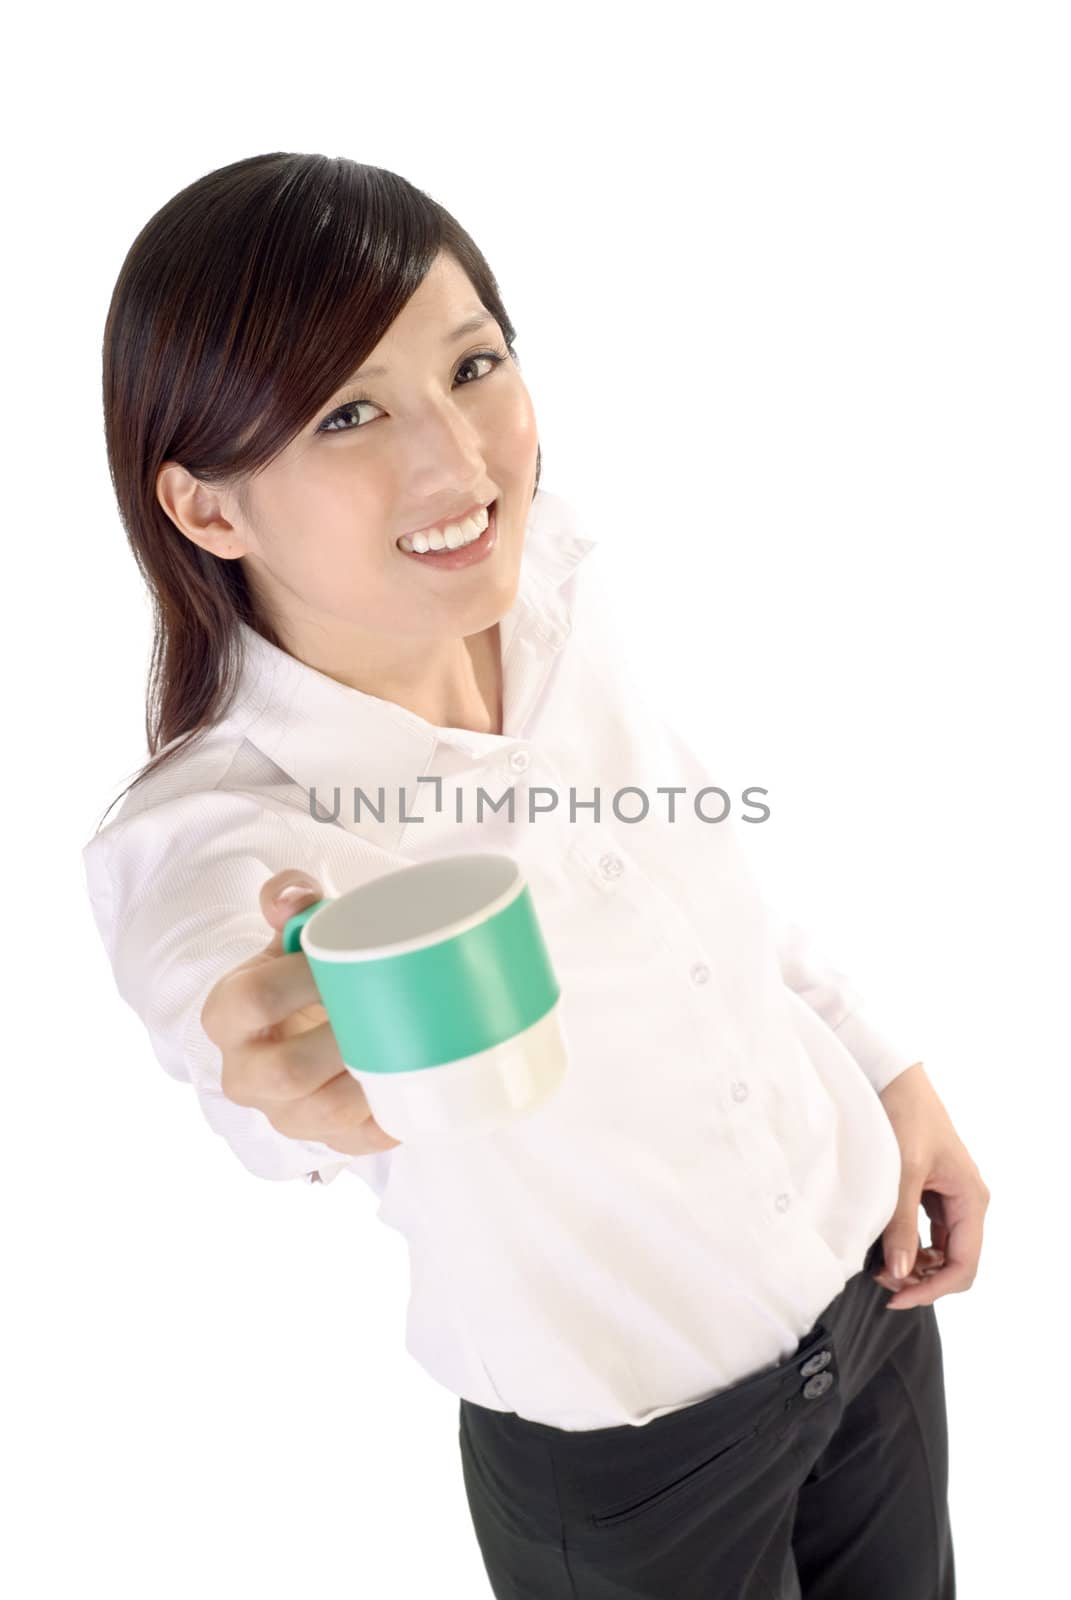 Business woman share cup of drink with smile expression on white background.